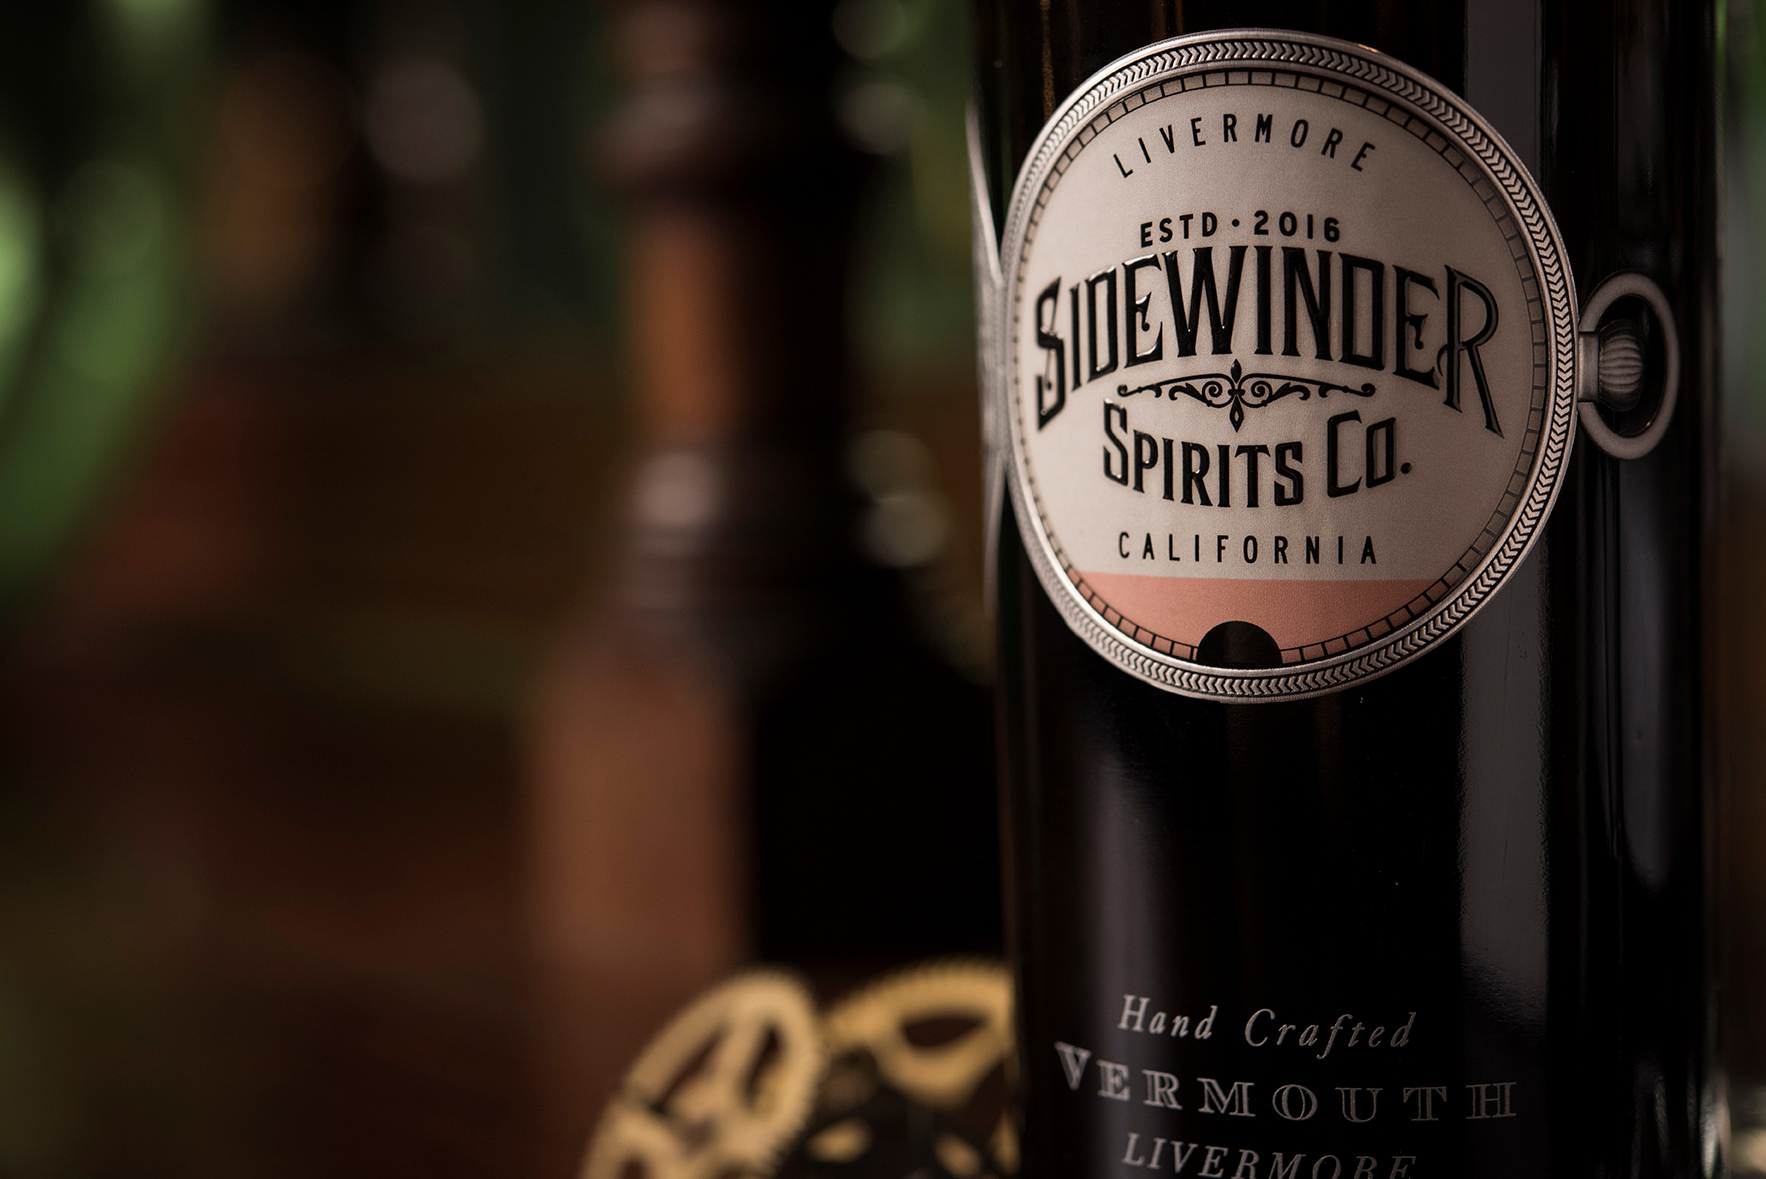 Group A, Category A2 and Best in Show MCC USA for Sidewinder Spirits